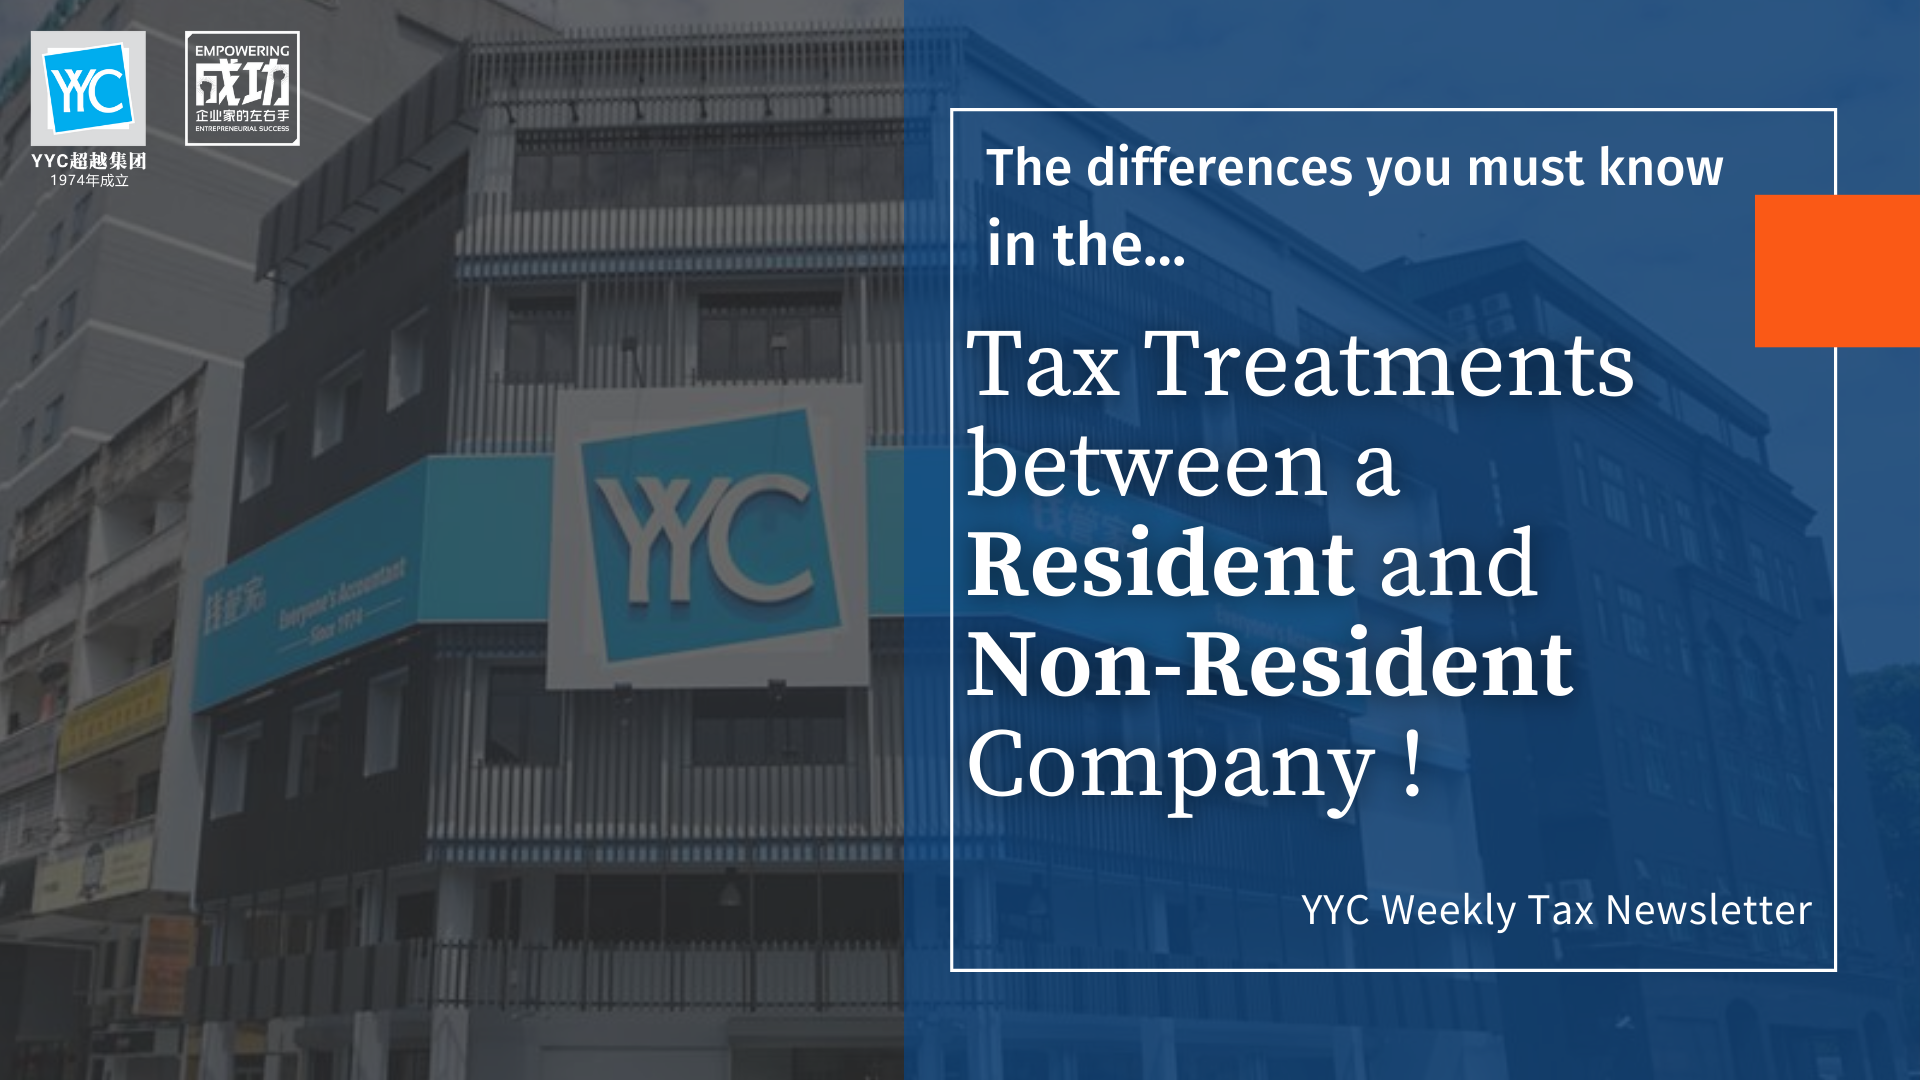 Resident means resident in Malaysia for the basis year for a year of assessment (YA) by virtue of section 8 and subsection 61(3) of the ITA...